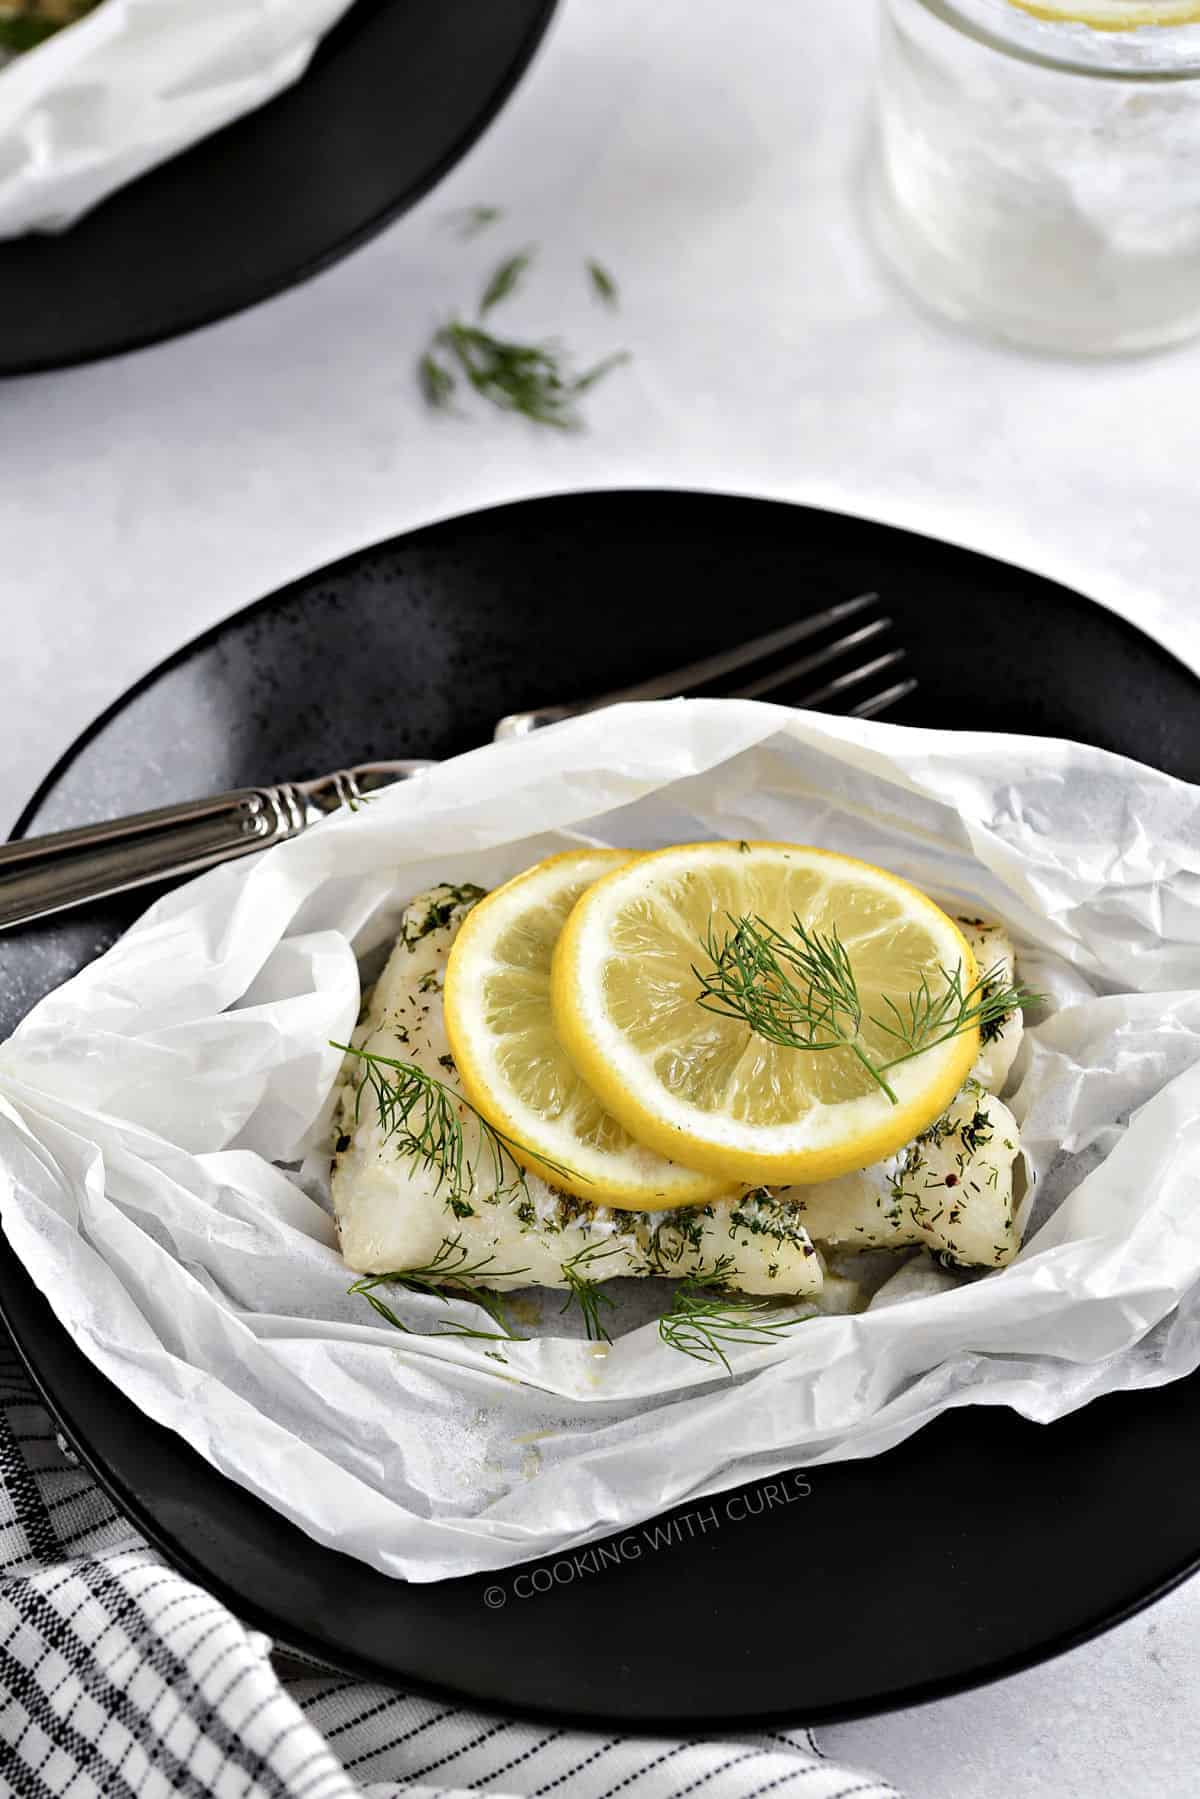 A cod filet topped with dill and a lemon slice in parchment paper sitting on a black plate.